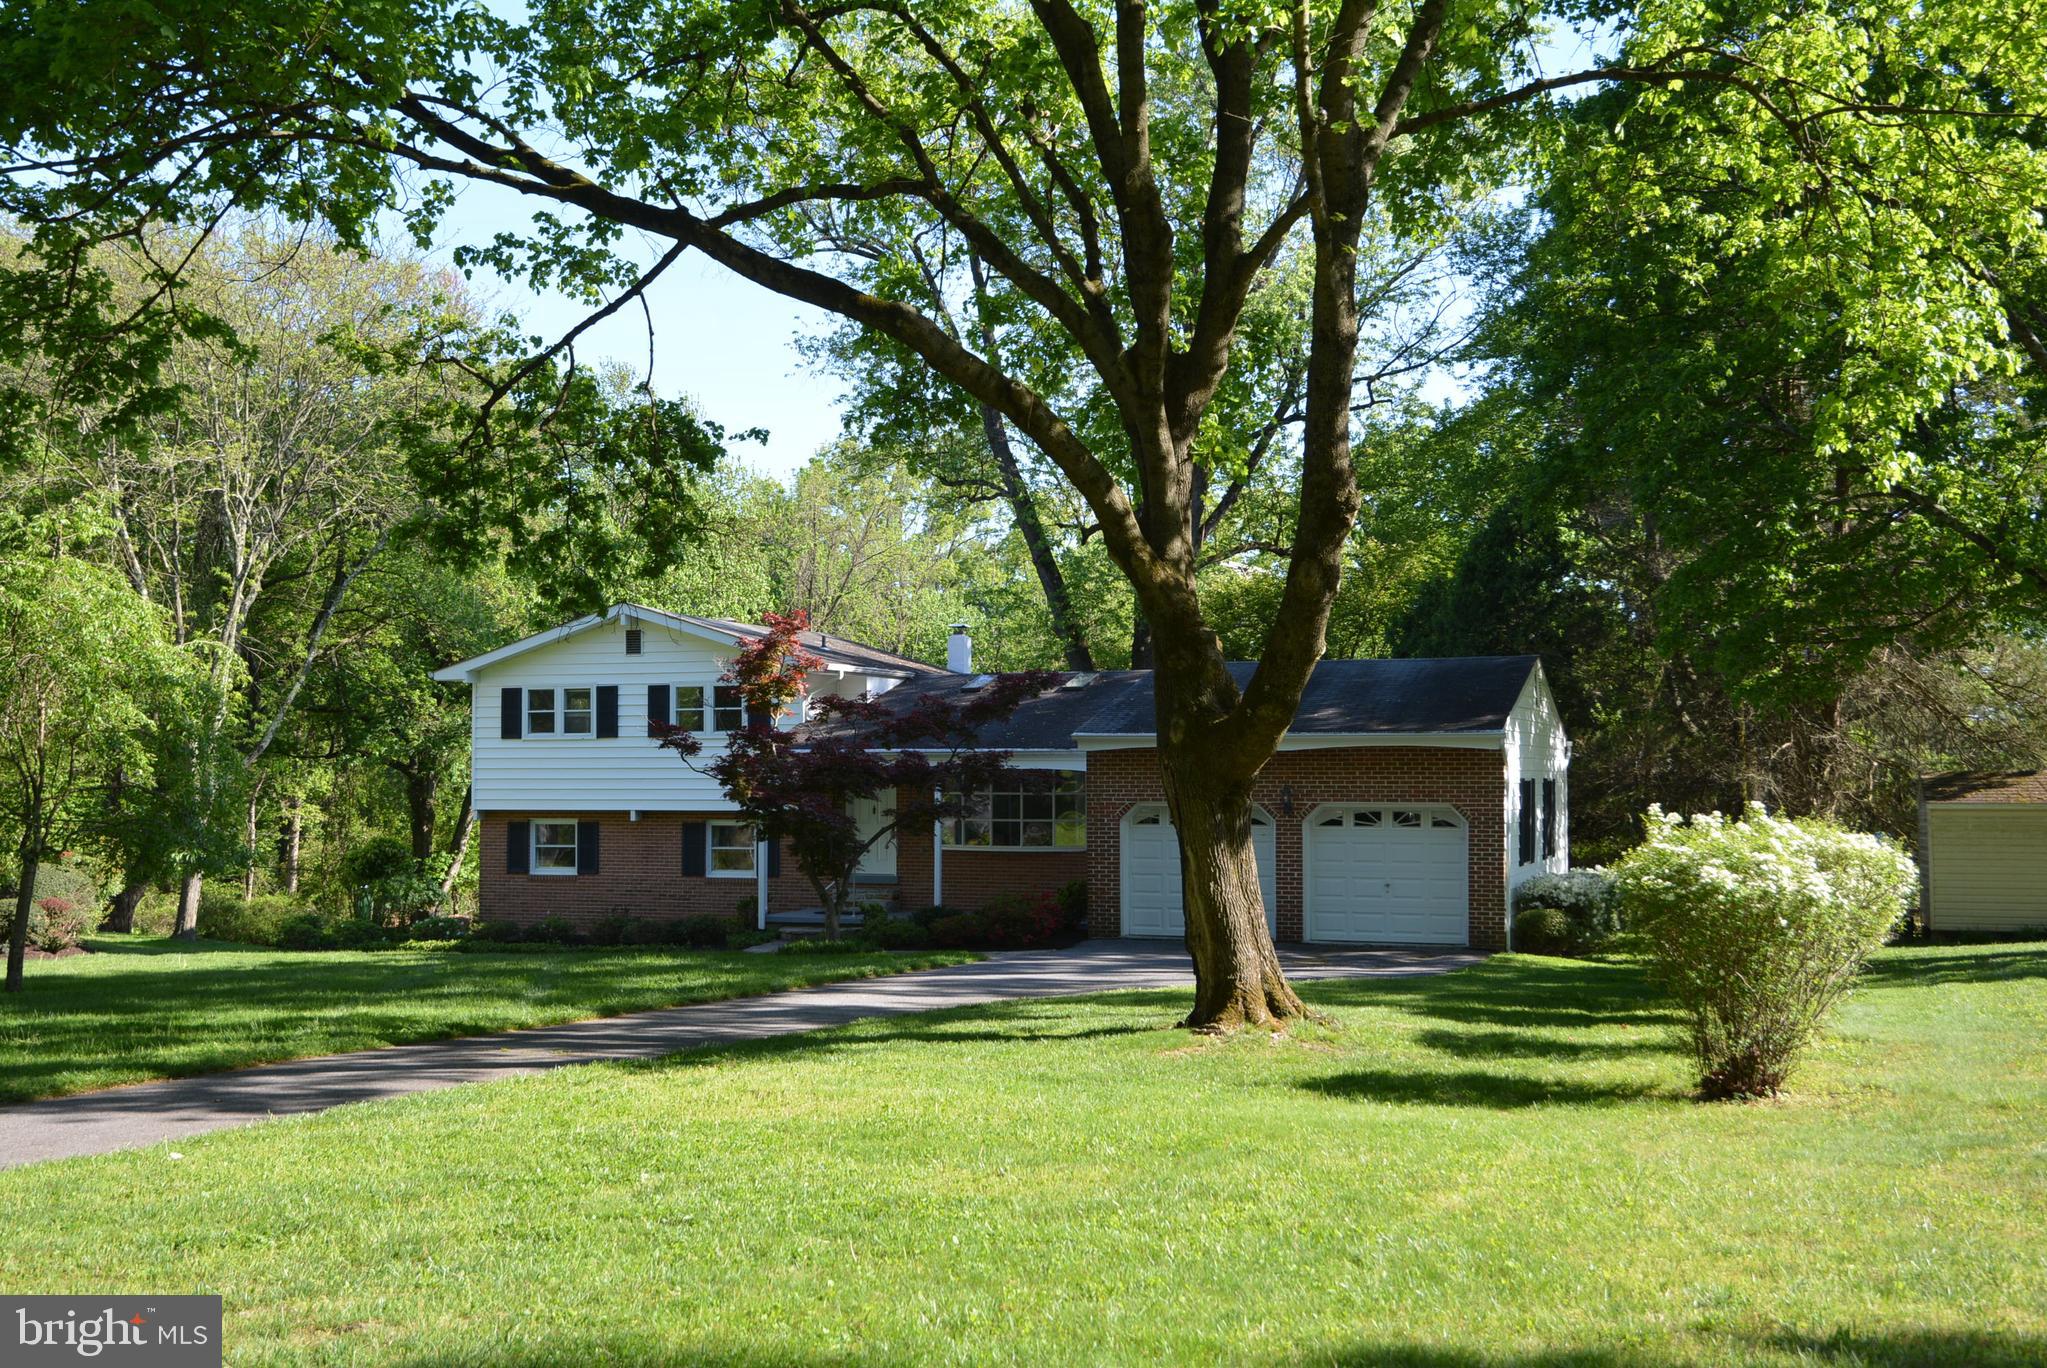 a front view of a house with a yard and a large tree